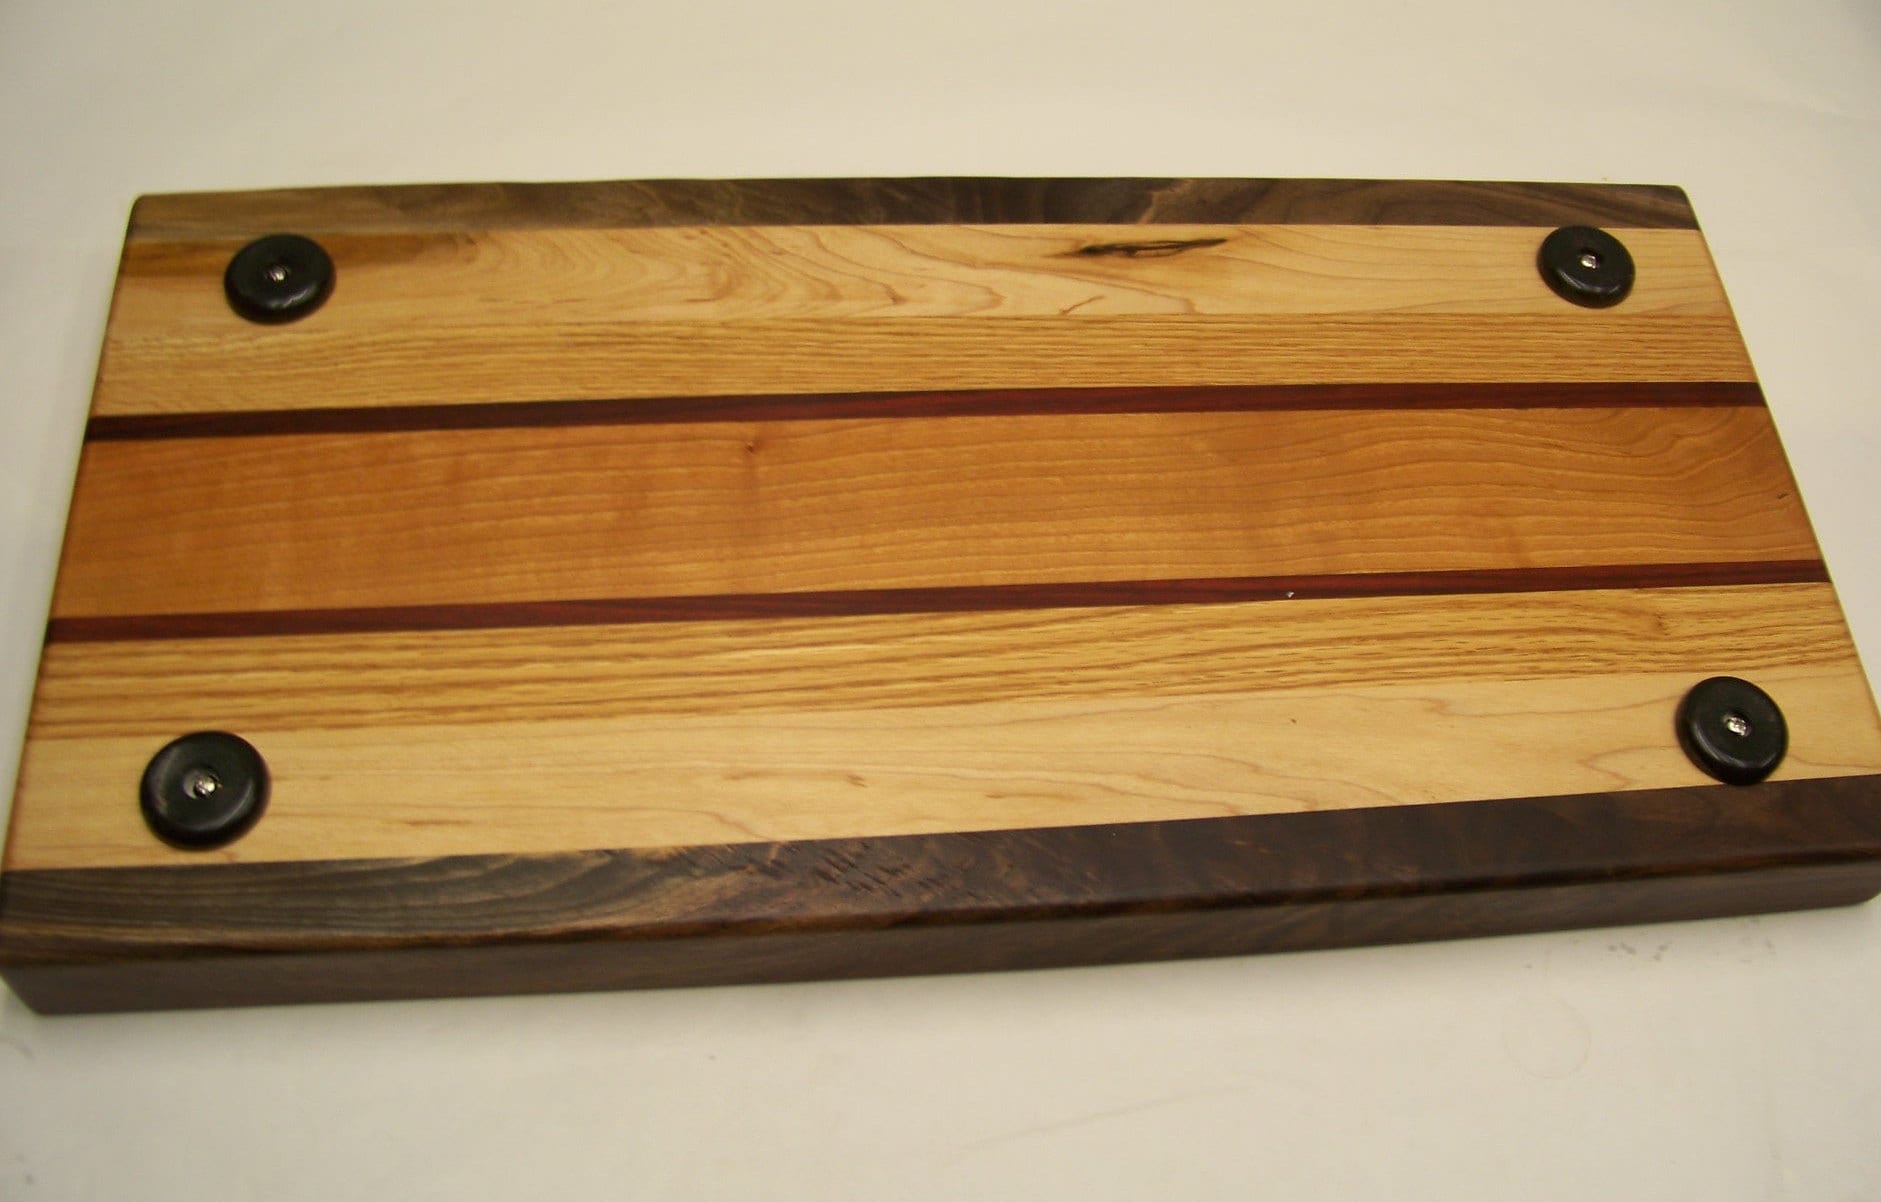 Extra large multiwood edge grain butcher block 24 x 12 x 2 thick with pads. Shipped by priority